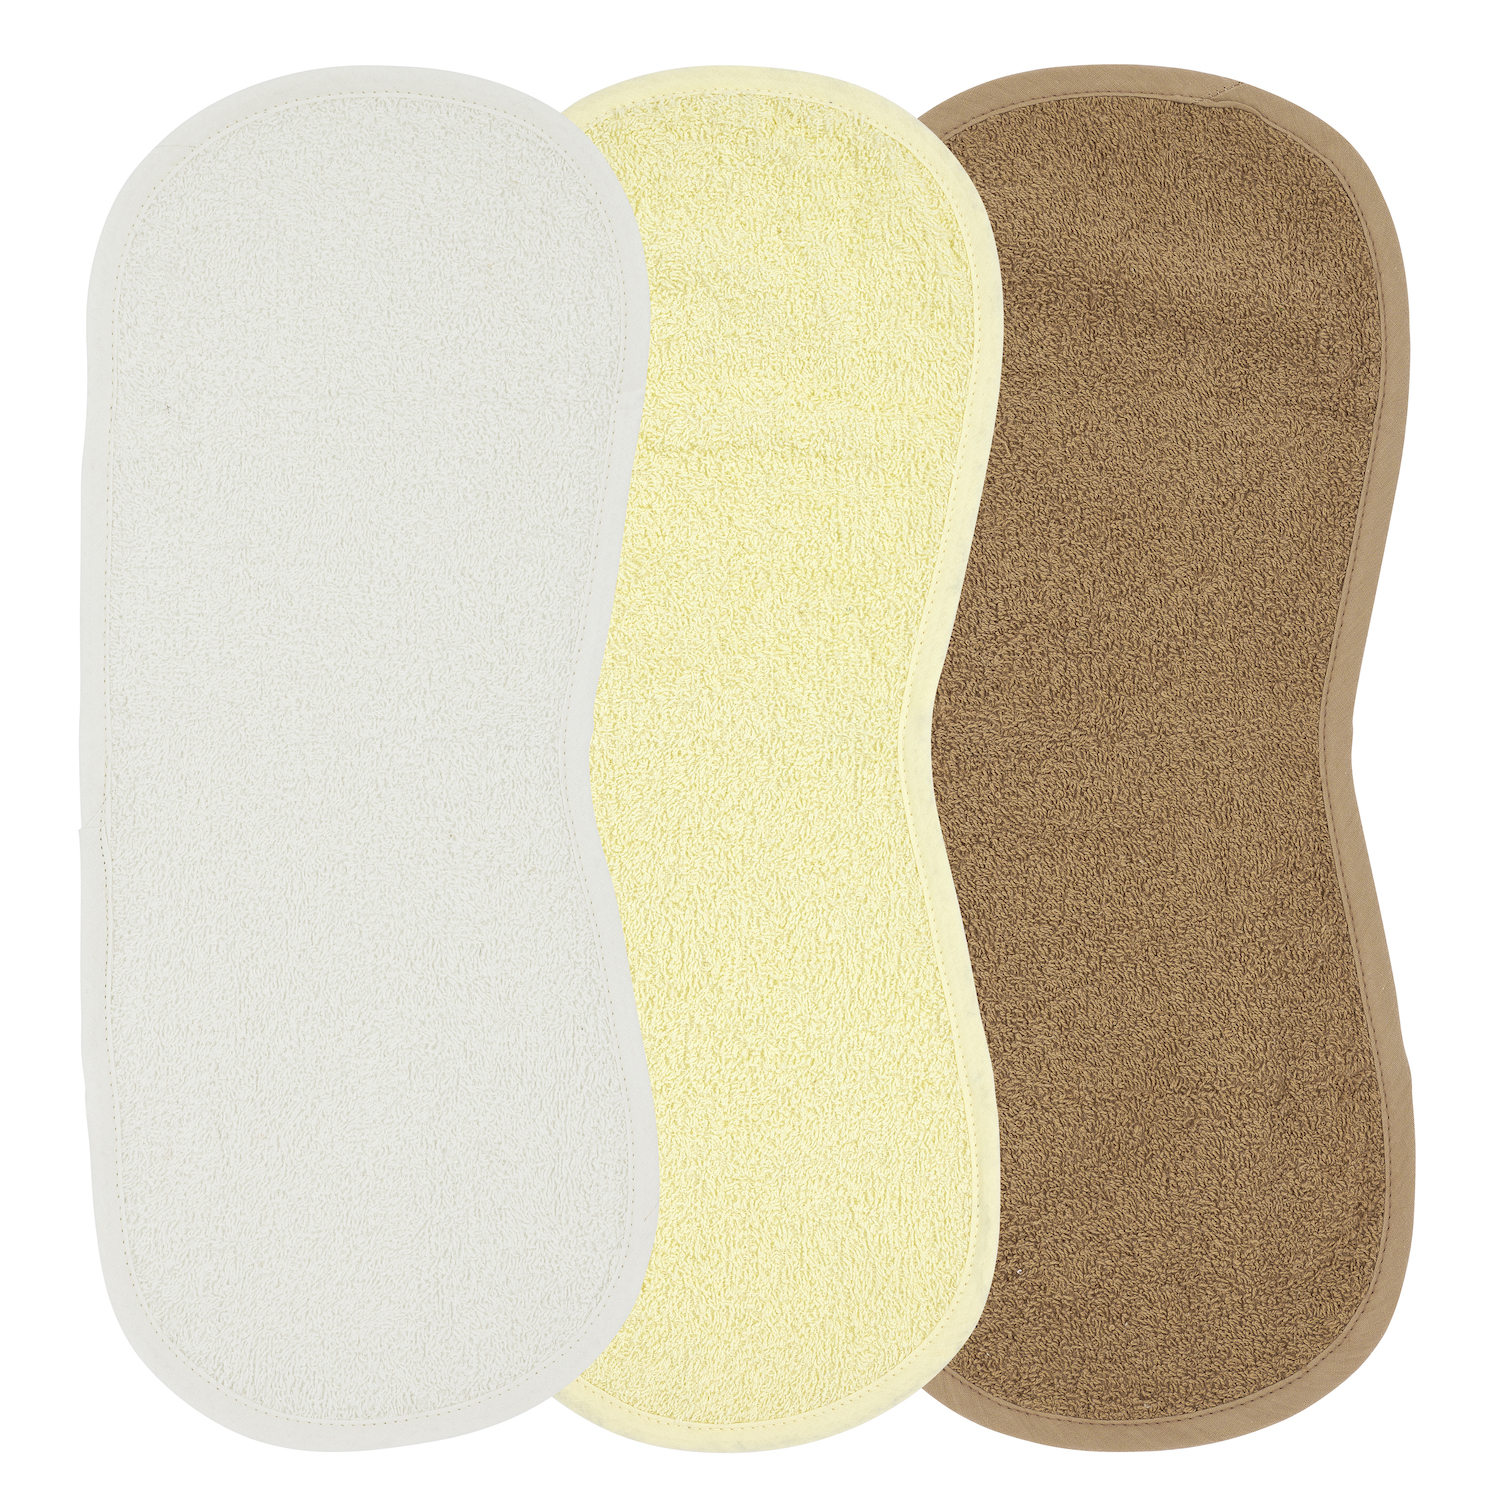 Basic Terry Burp Cloths Shoulder Model 3-pack  - Offwhite/Soft Yellow/Toffee - 53x20cm